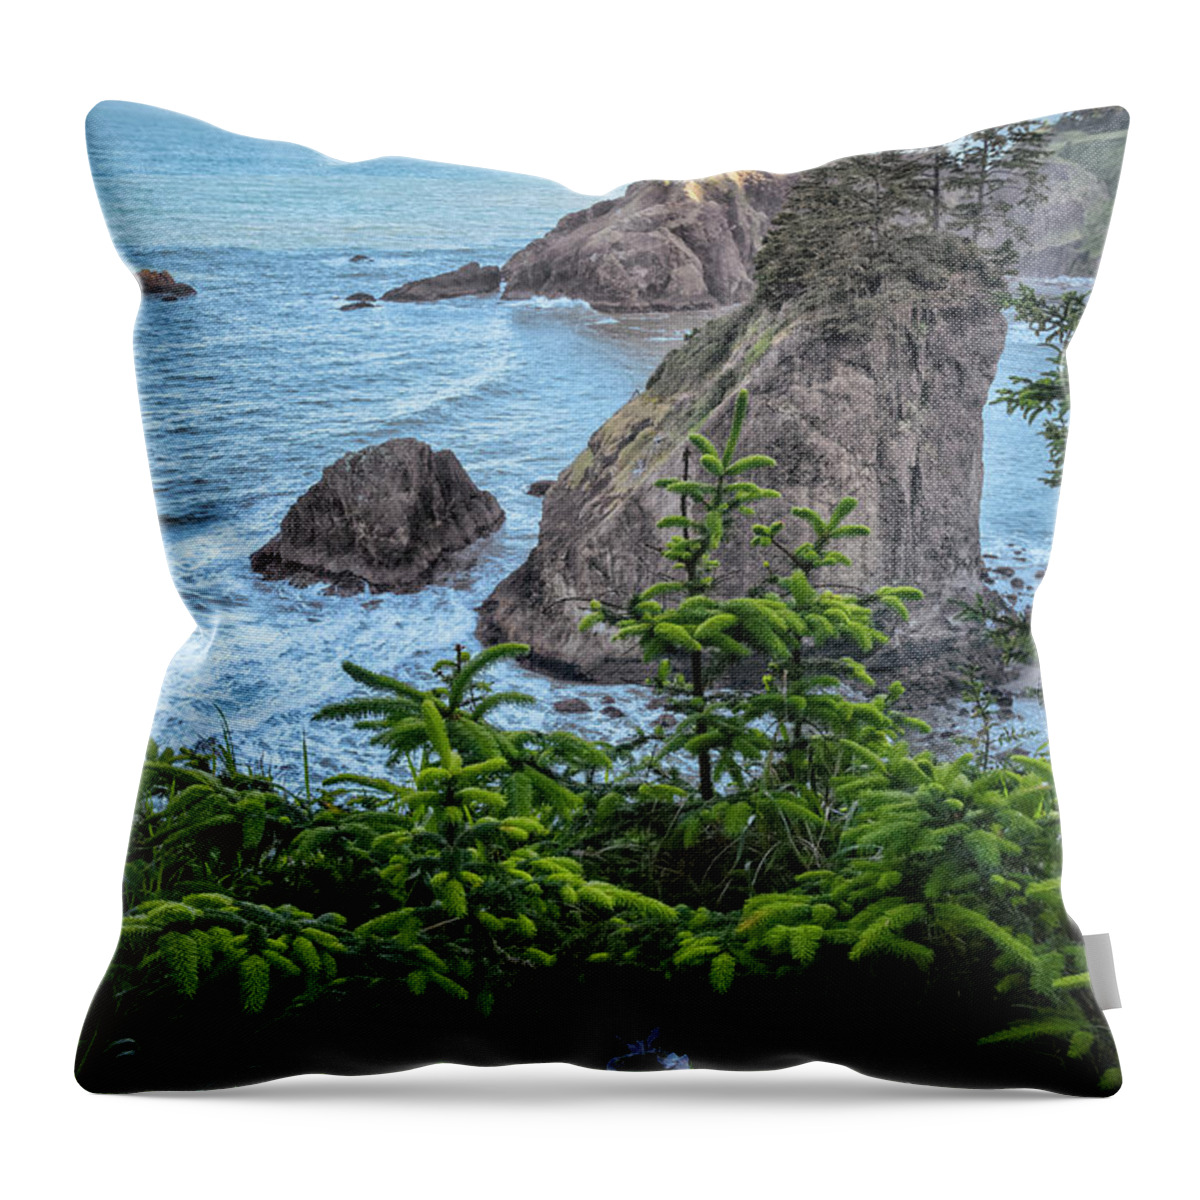 Arch Rock Roadside Viewpoint Throw Pillow featuring the photograph Arch Rock Sea Stacks by Al Andersen